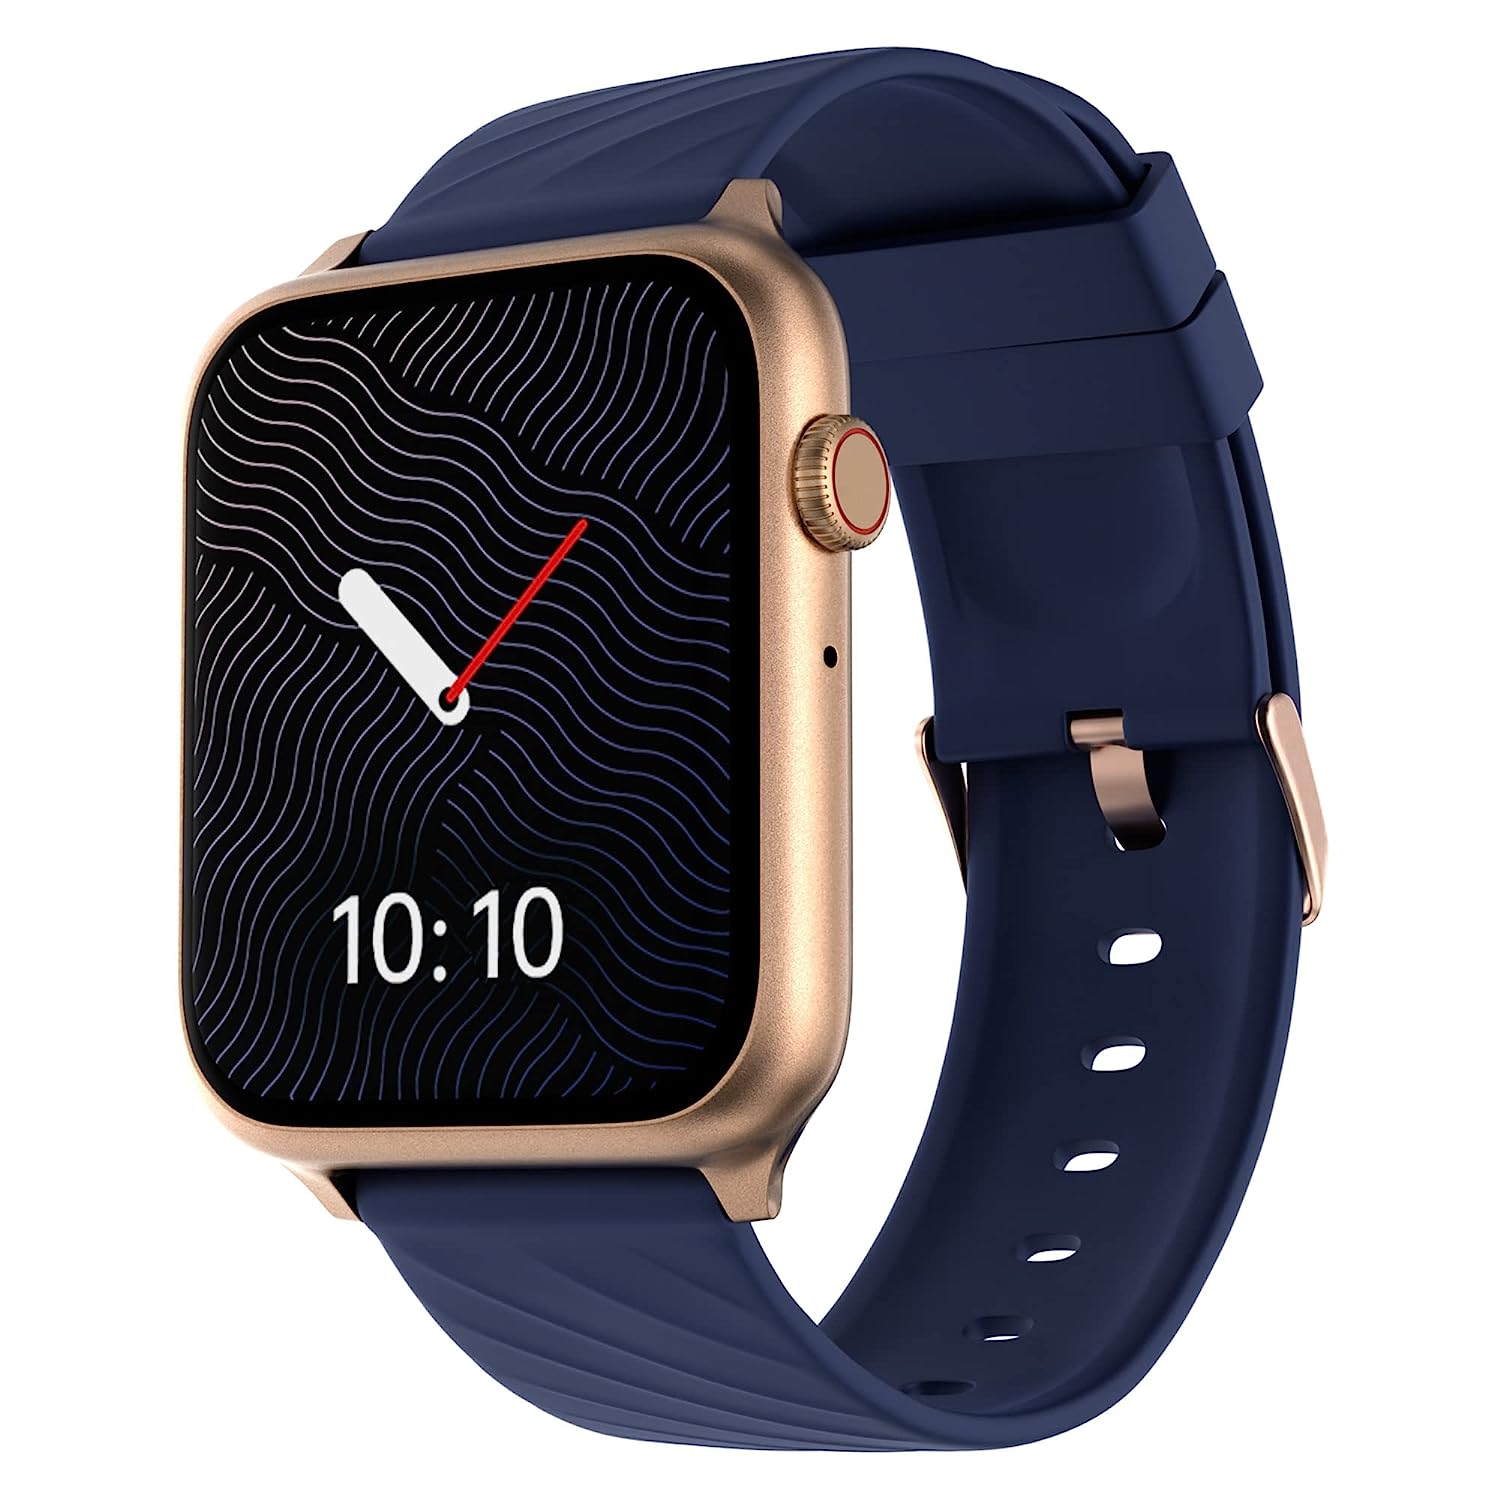 Zebronics ICONIC LITE AMOLED Smartwatch with Bluetooth Calling, 100+ Sport modes, IP67, 1.78" 2.5D Curved display, Voice Assistant, 10 Built-in / Customizable watch faces and Sleep monitor (Gold Blue)